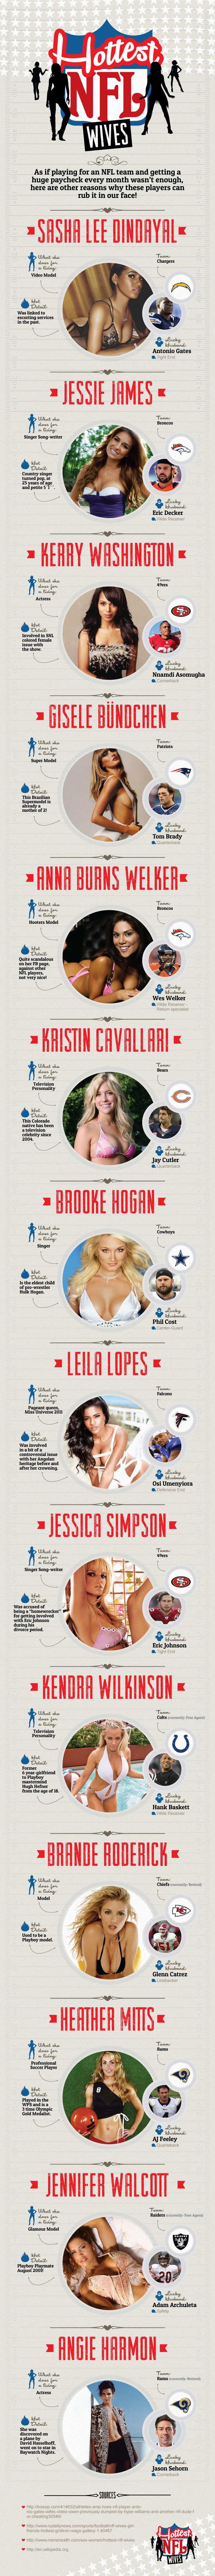 Hottest NFL Wives